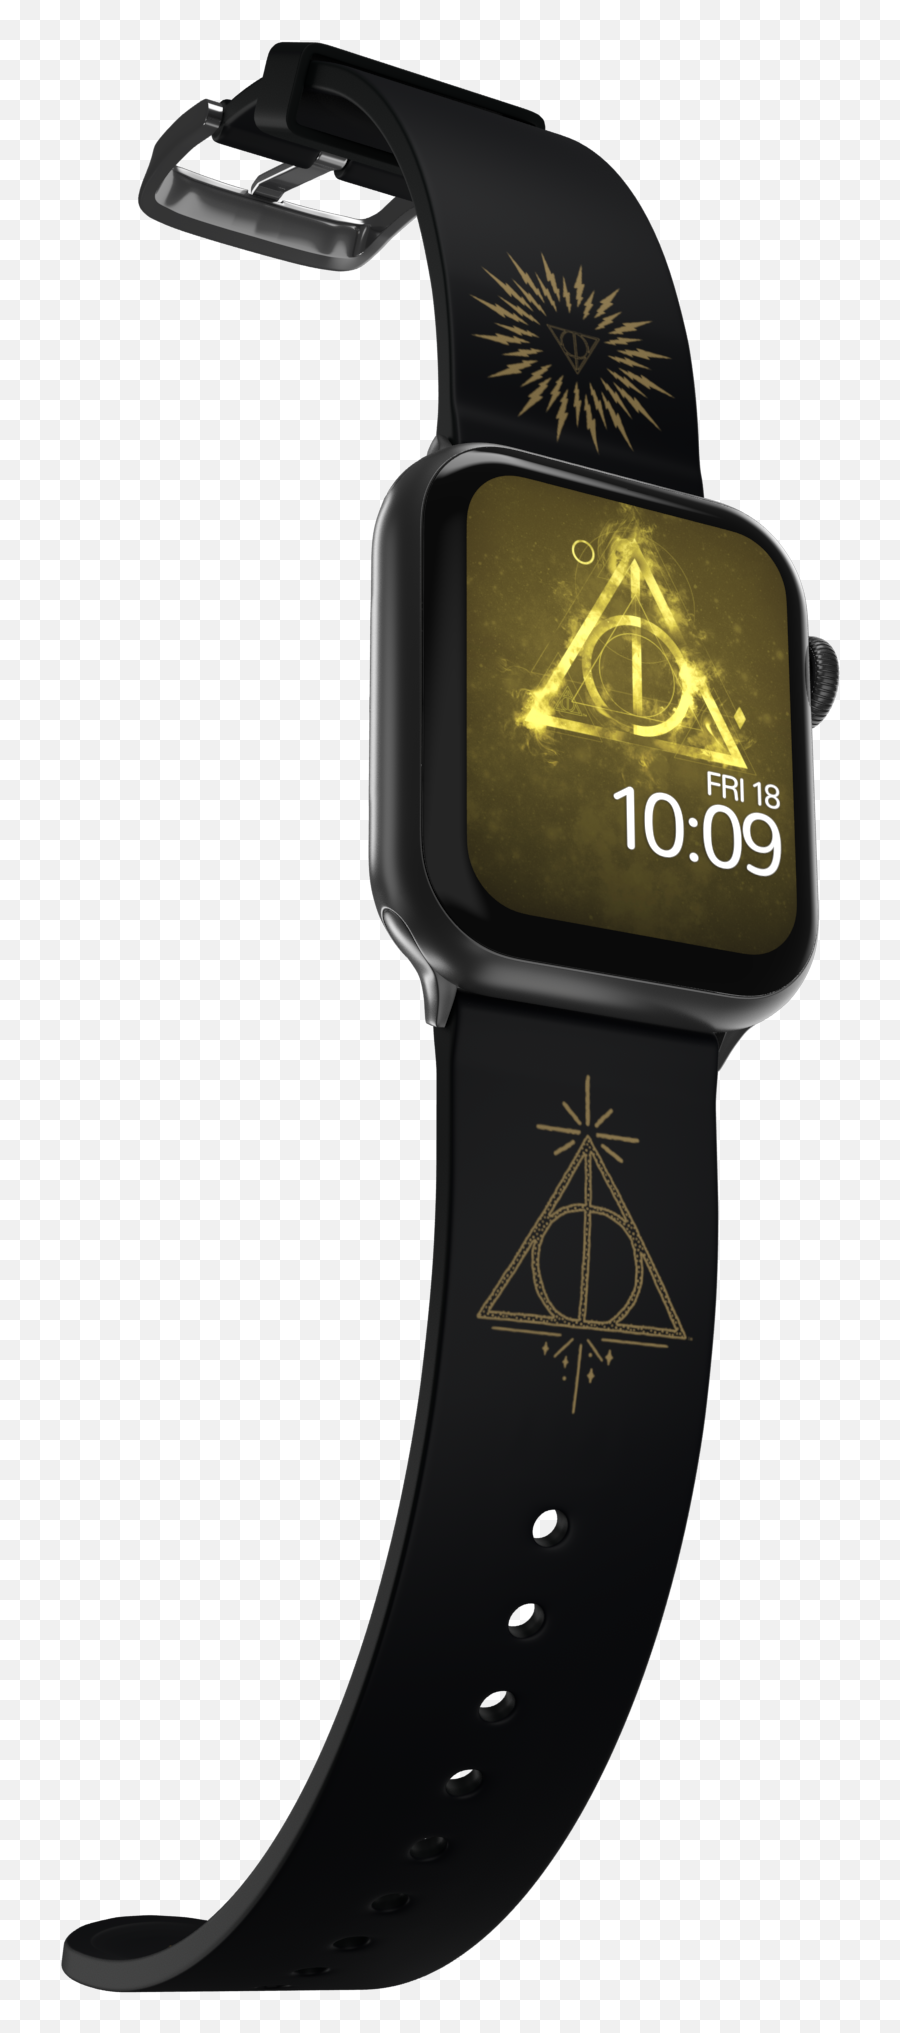 Silicone Collection U2013 Tagged Deathly Hallows U2013 Mobyfox - Deathly Hallows Apple Watch Band Emoji,Deathly Hallows Png